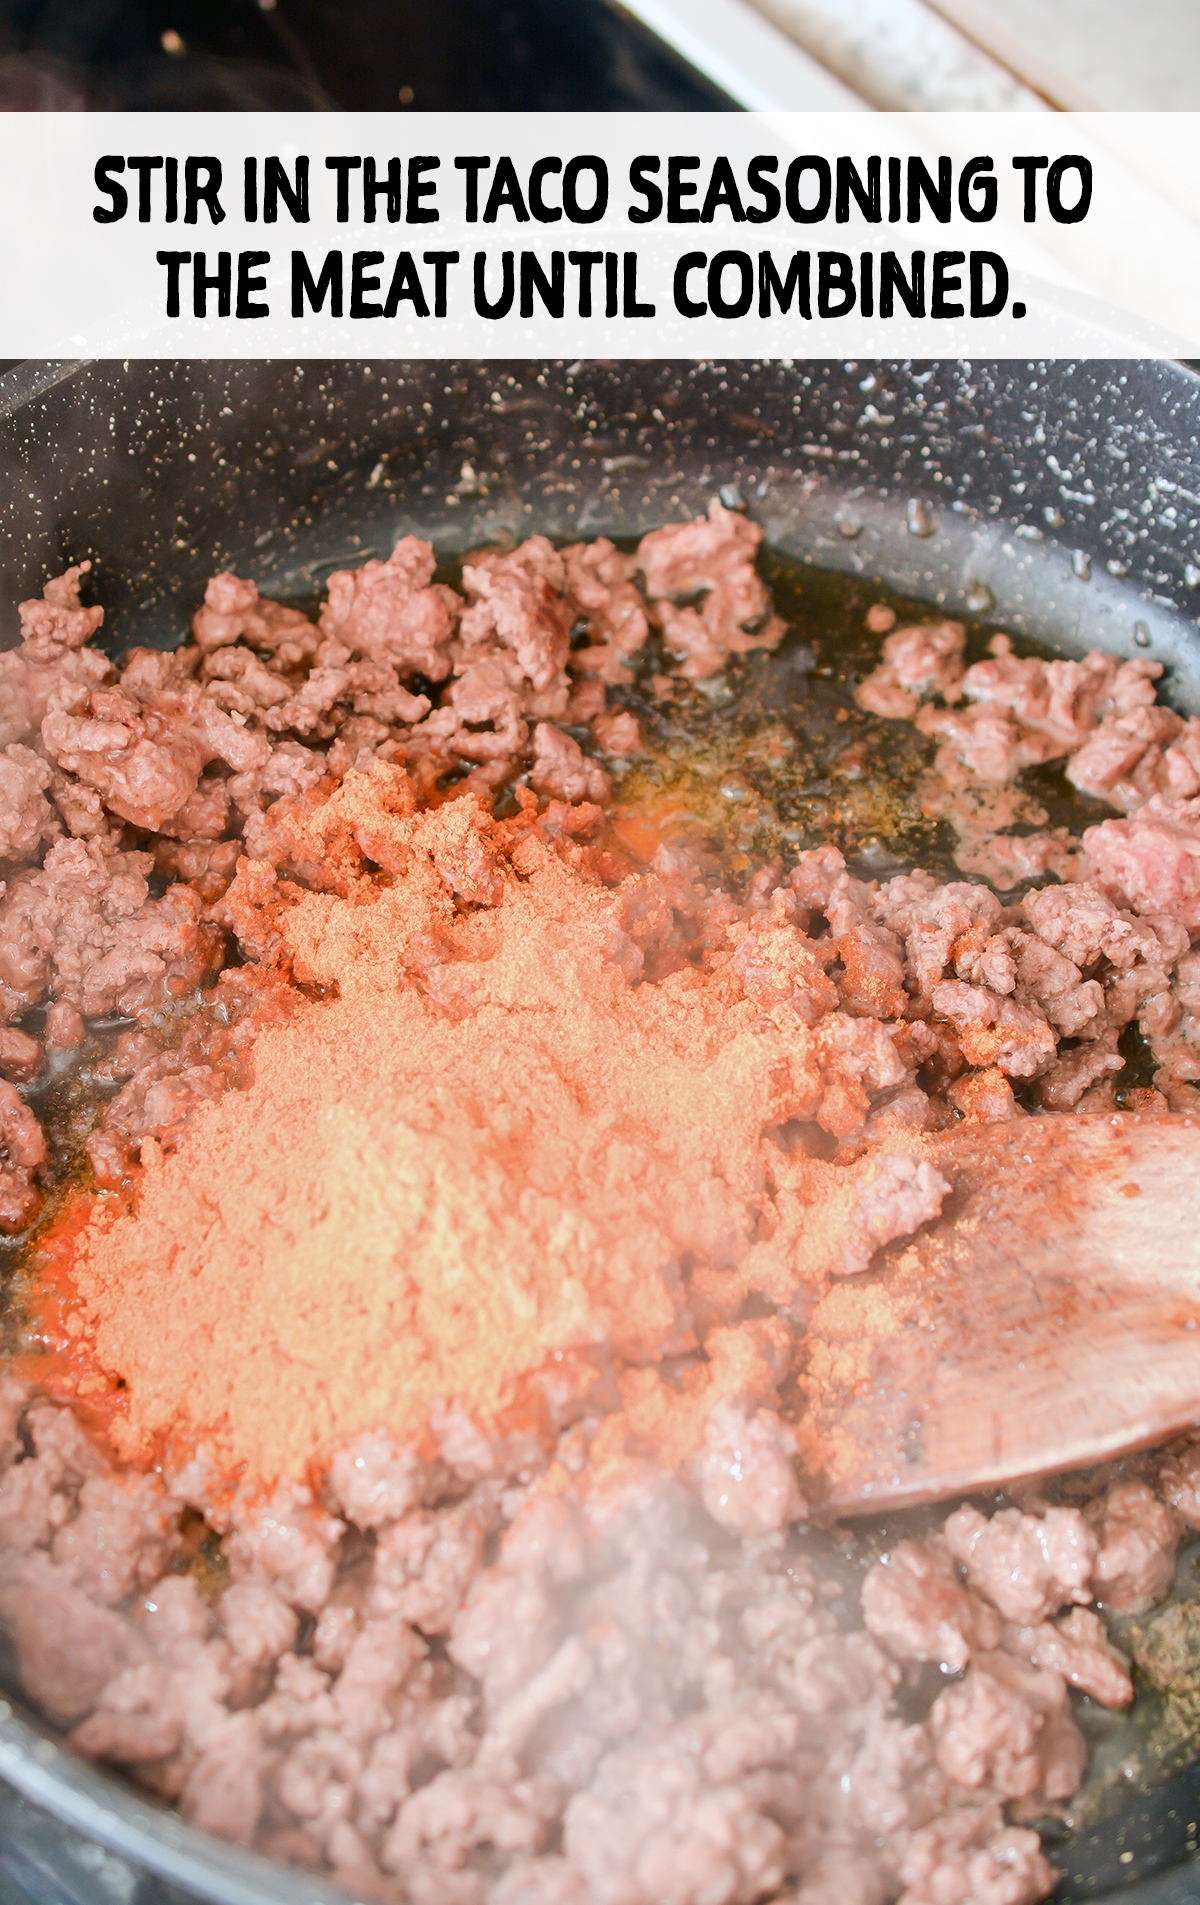 Stir in the taco seasoning to the meat until combined.